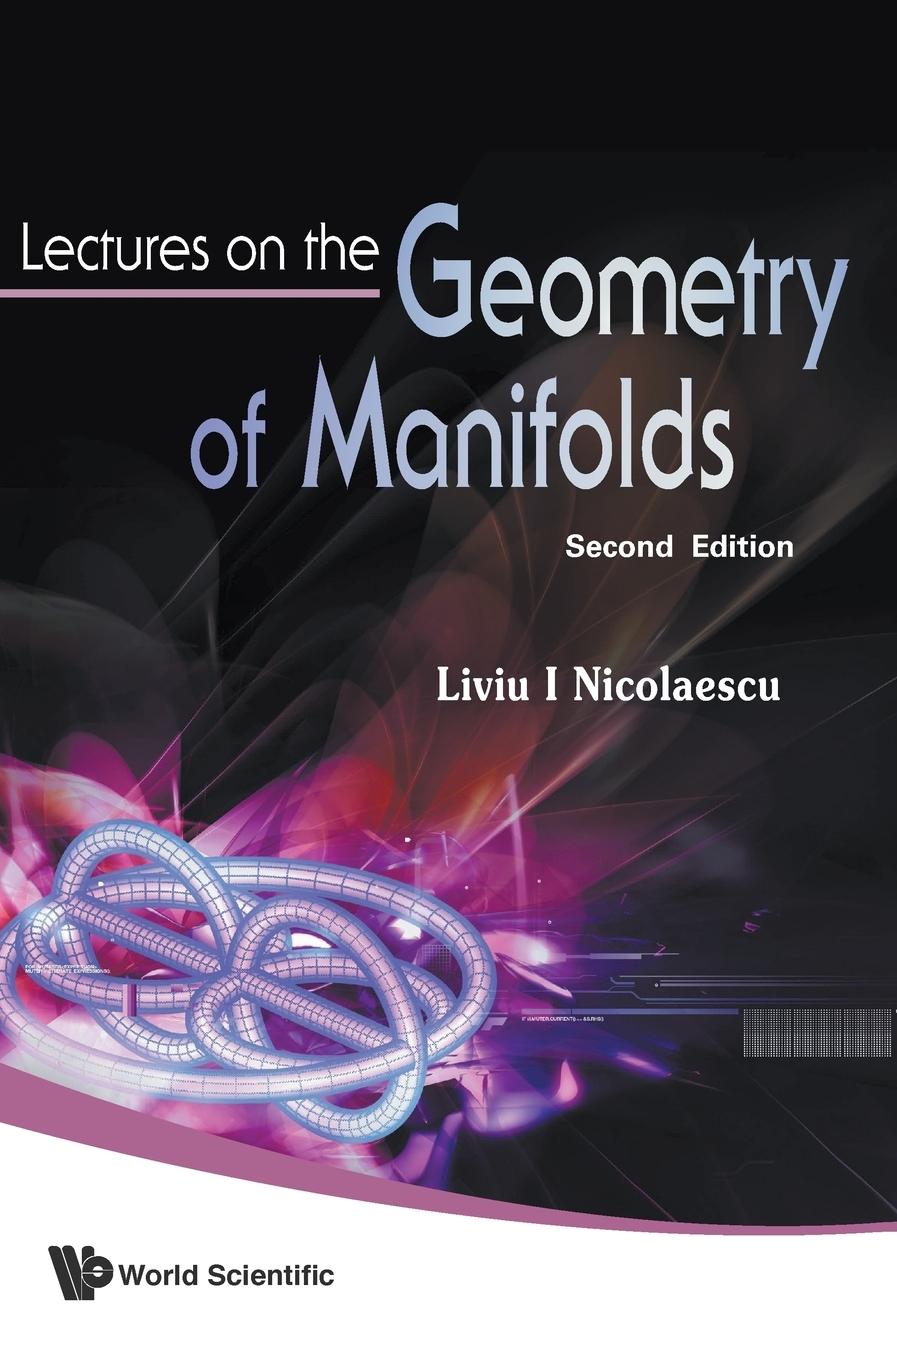 LECTURES ON THE GEOMETRY OF MANIFOLDS (2ND EDITION) - Nicolaescu, Liviu I